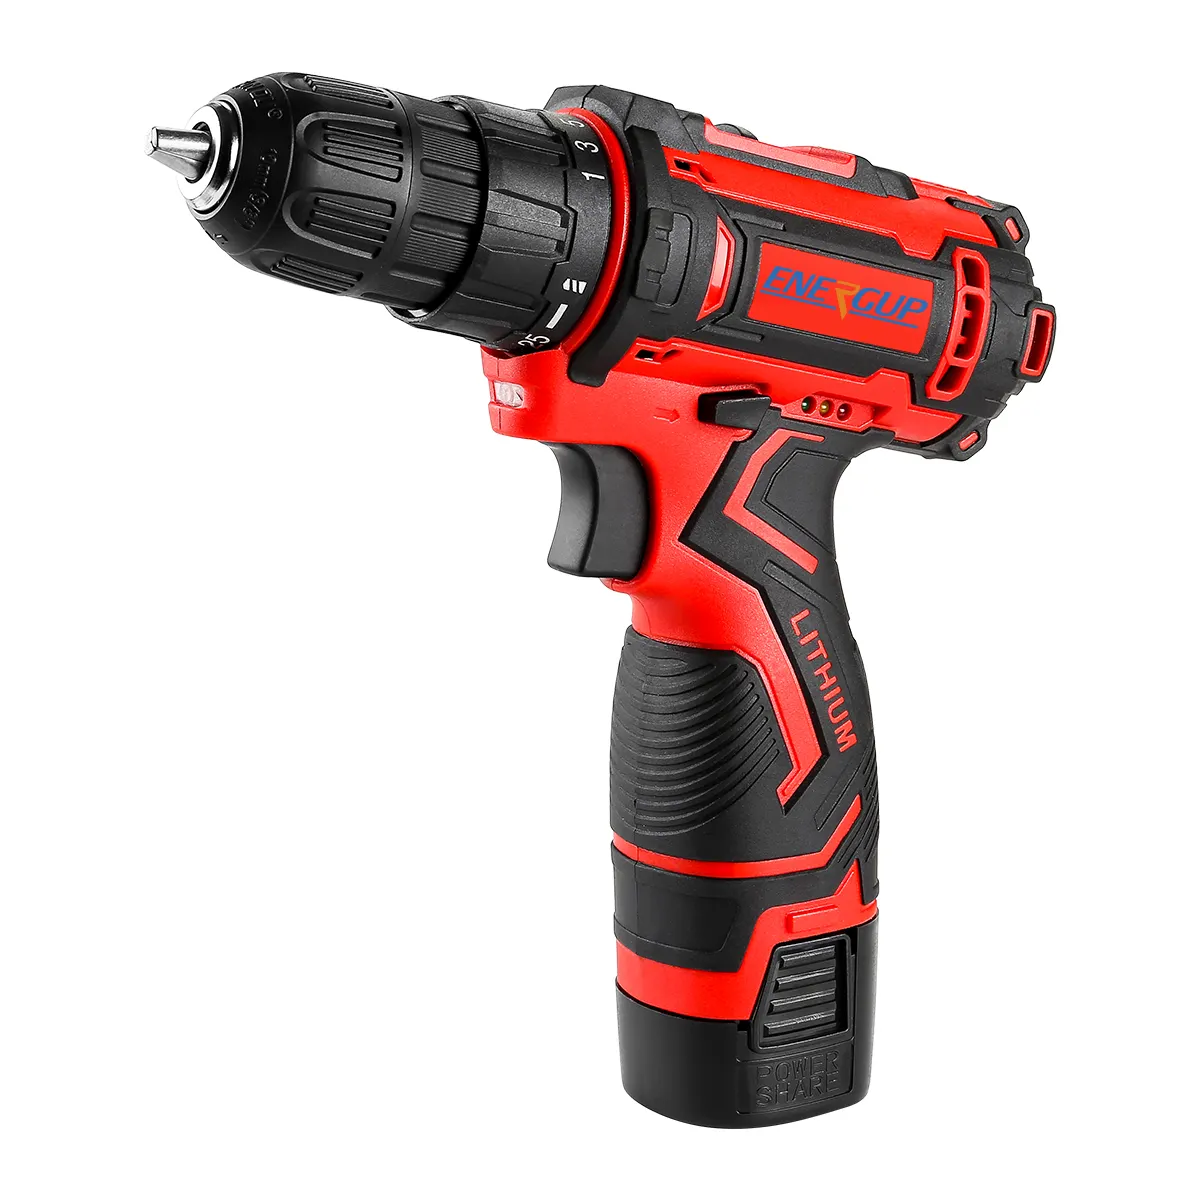 Energup mini hand electric performer cordless drill